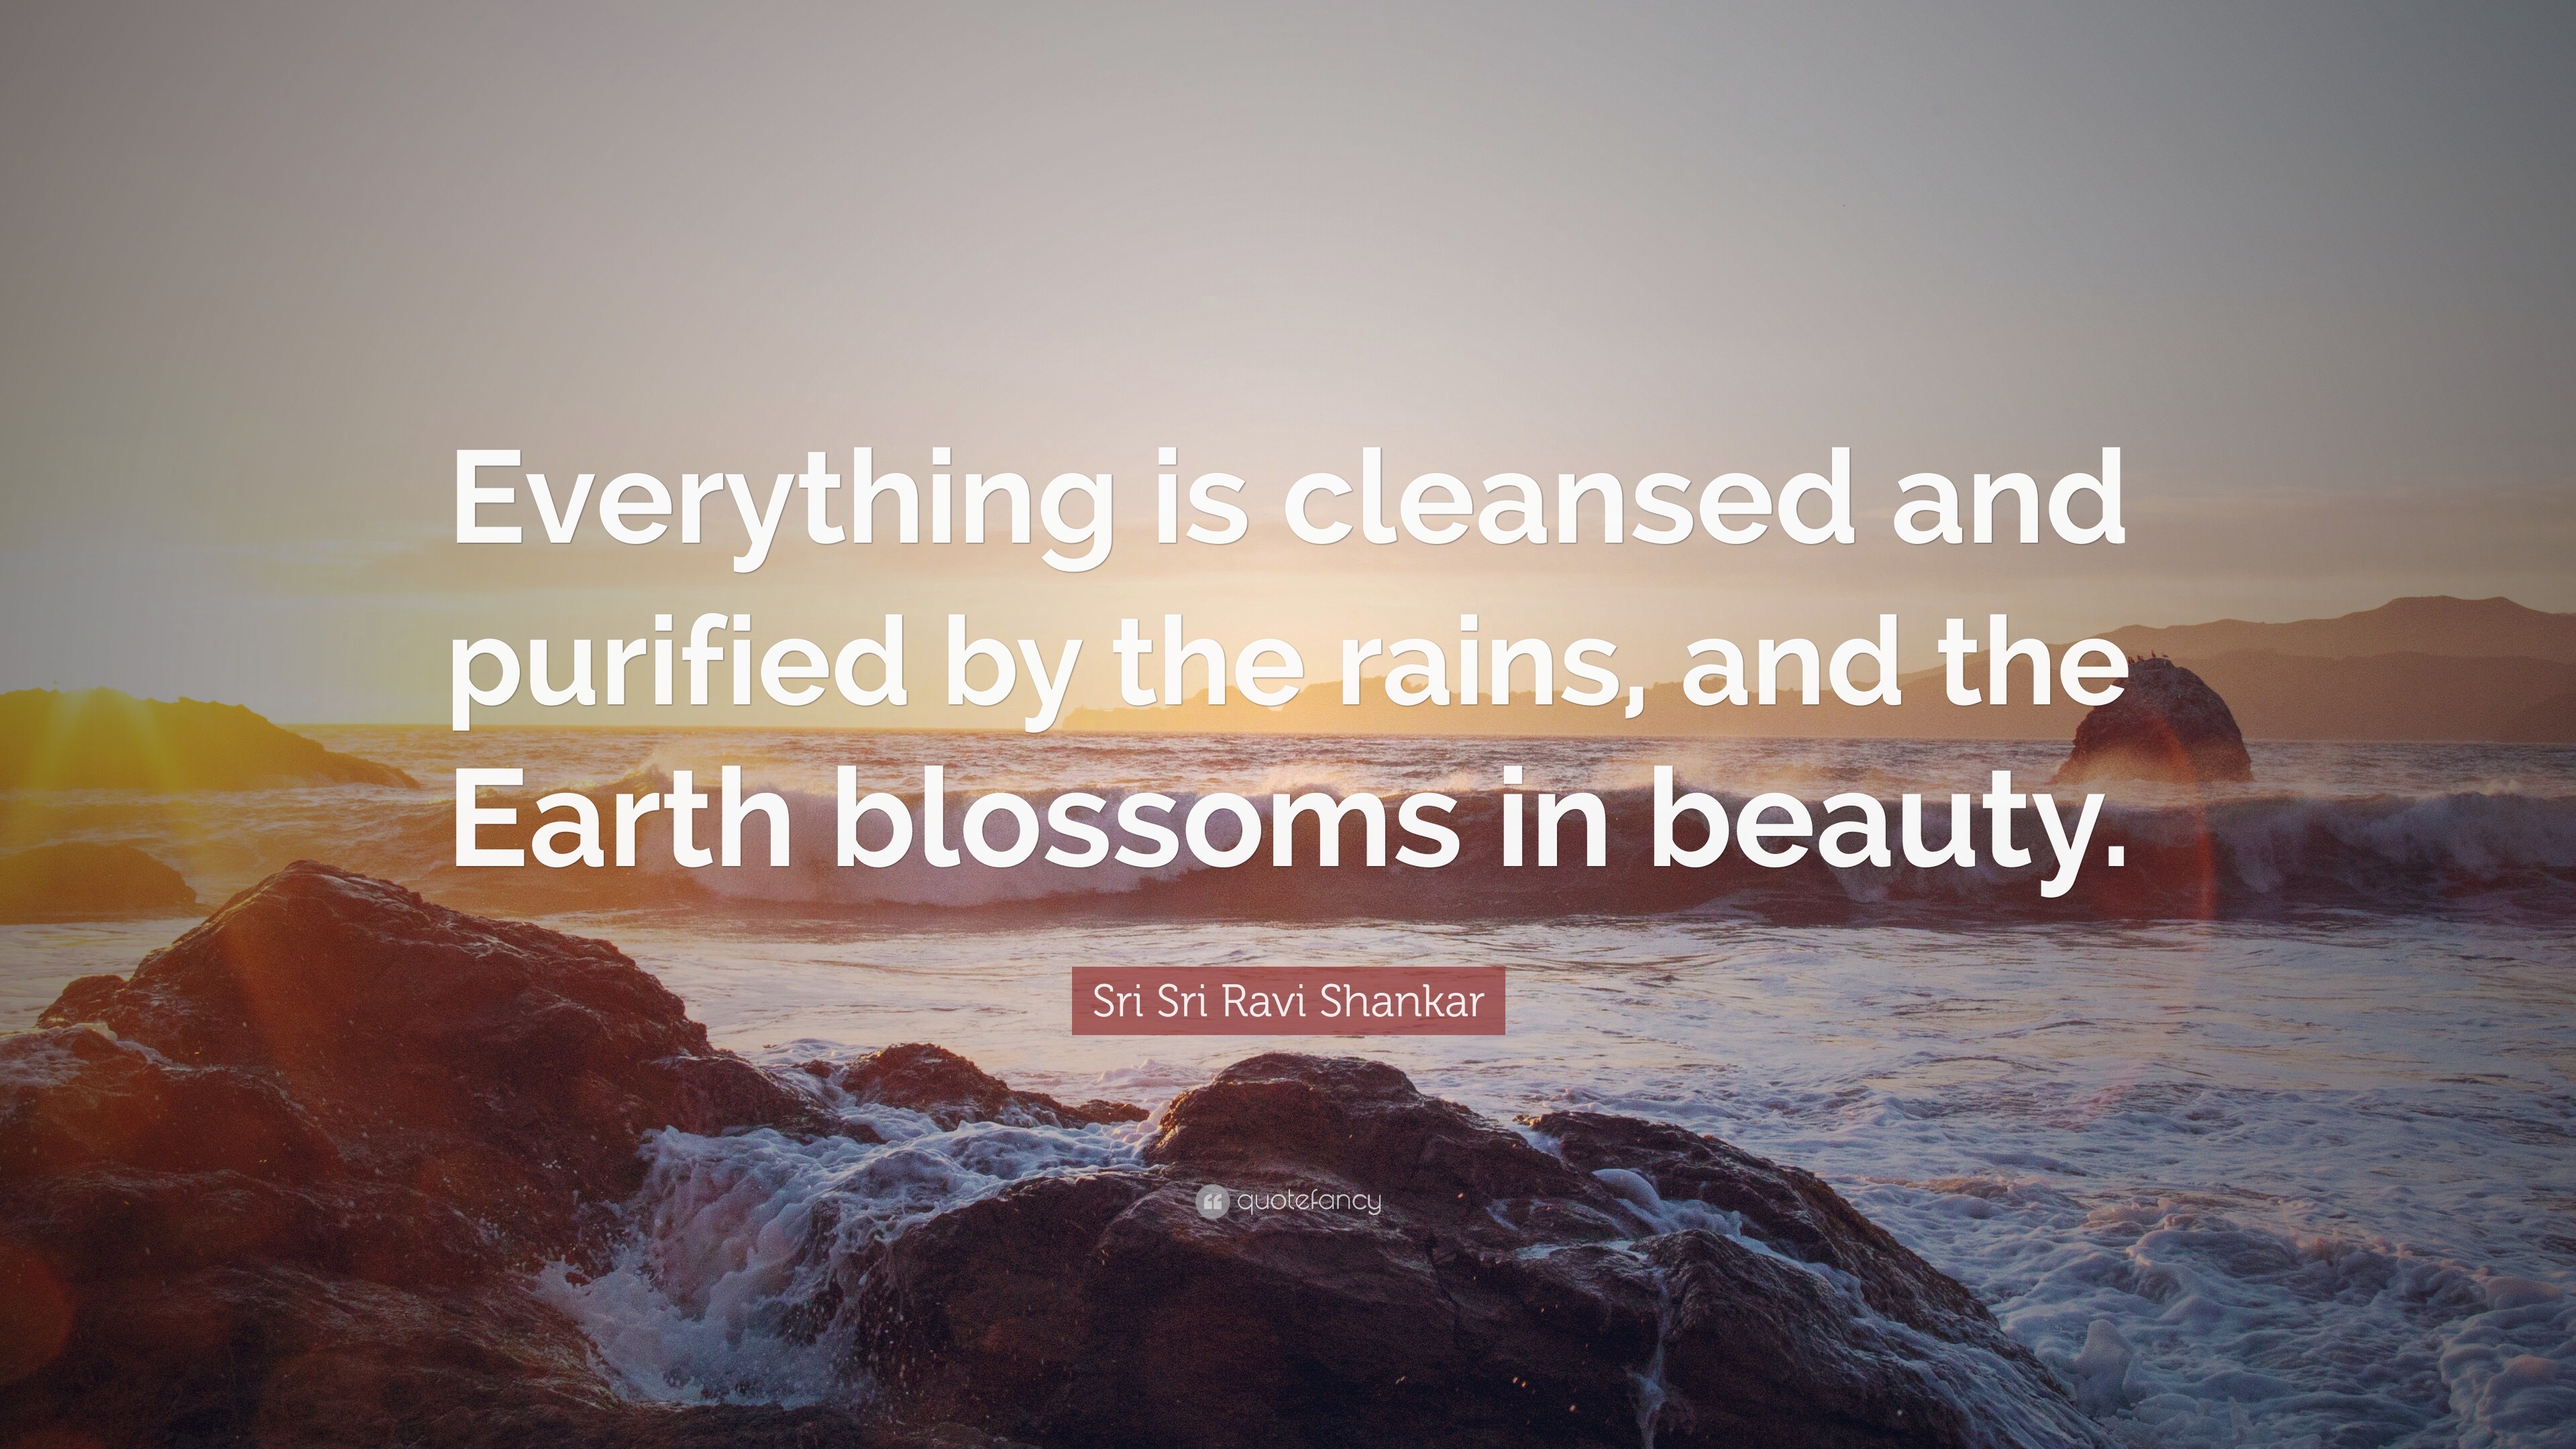 https://quotefancy.com/media/wallpaper/3840x2160/1847352-Sri-Sri-Ravi-Shankar-Quote-Everything-is-cleansed-and-purified-by.jpg